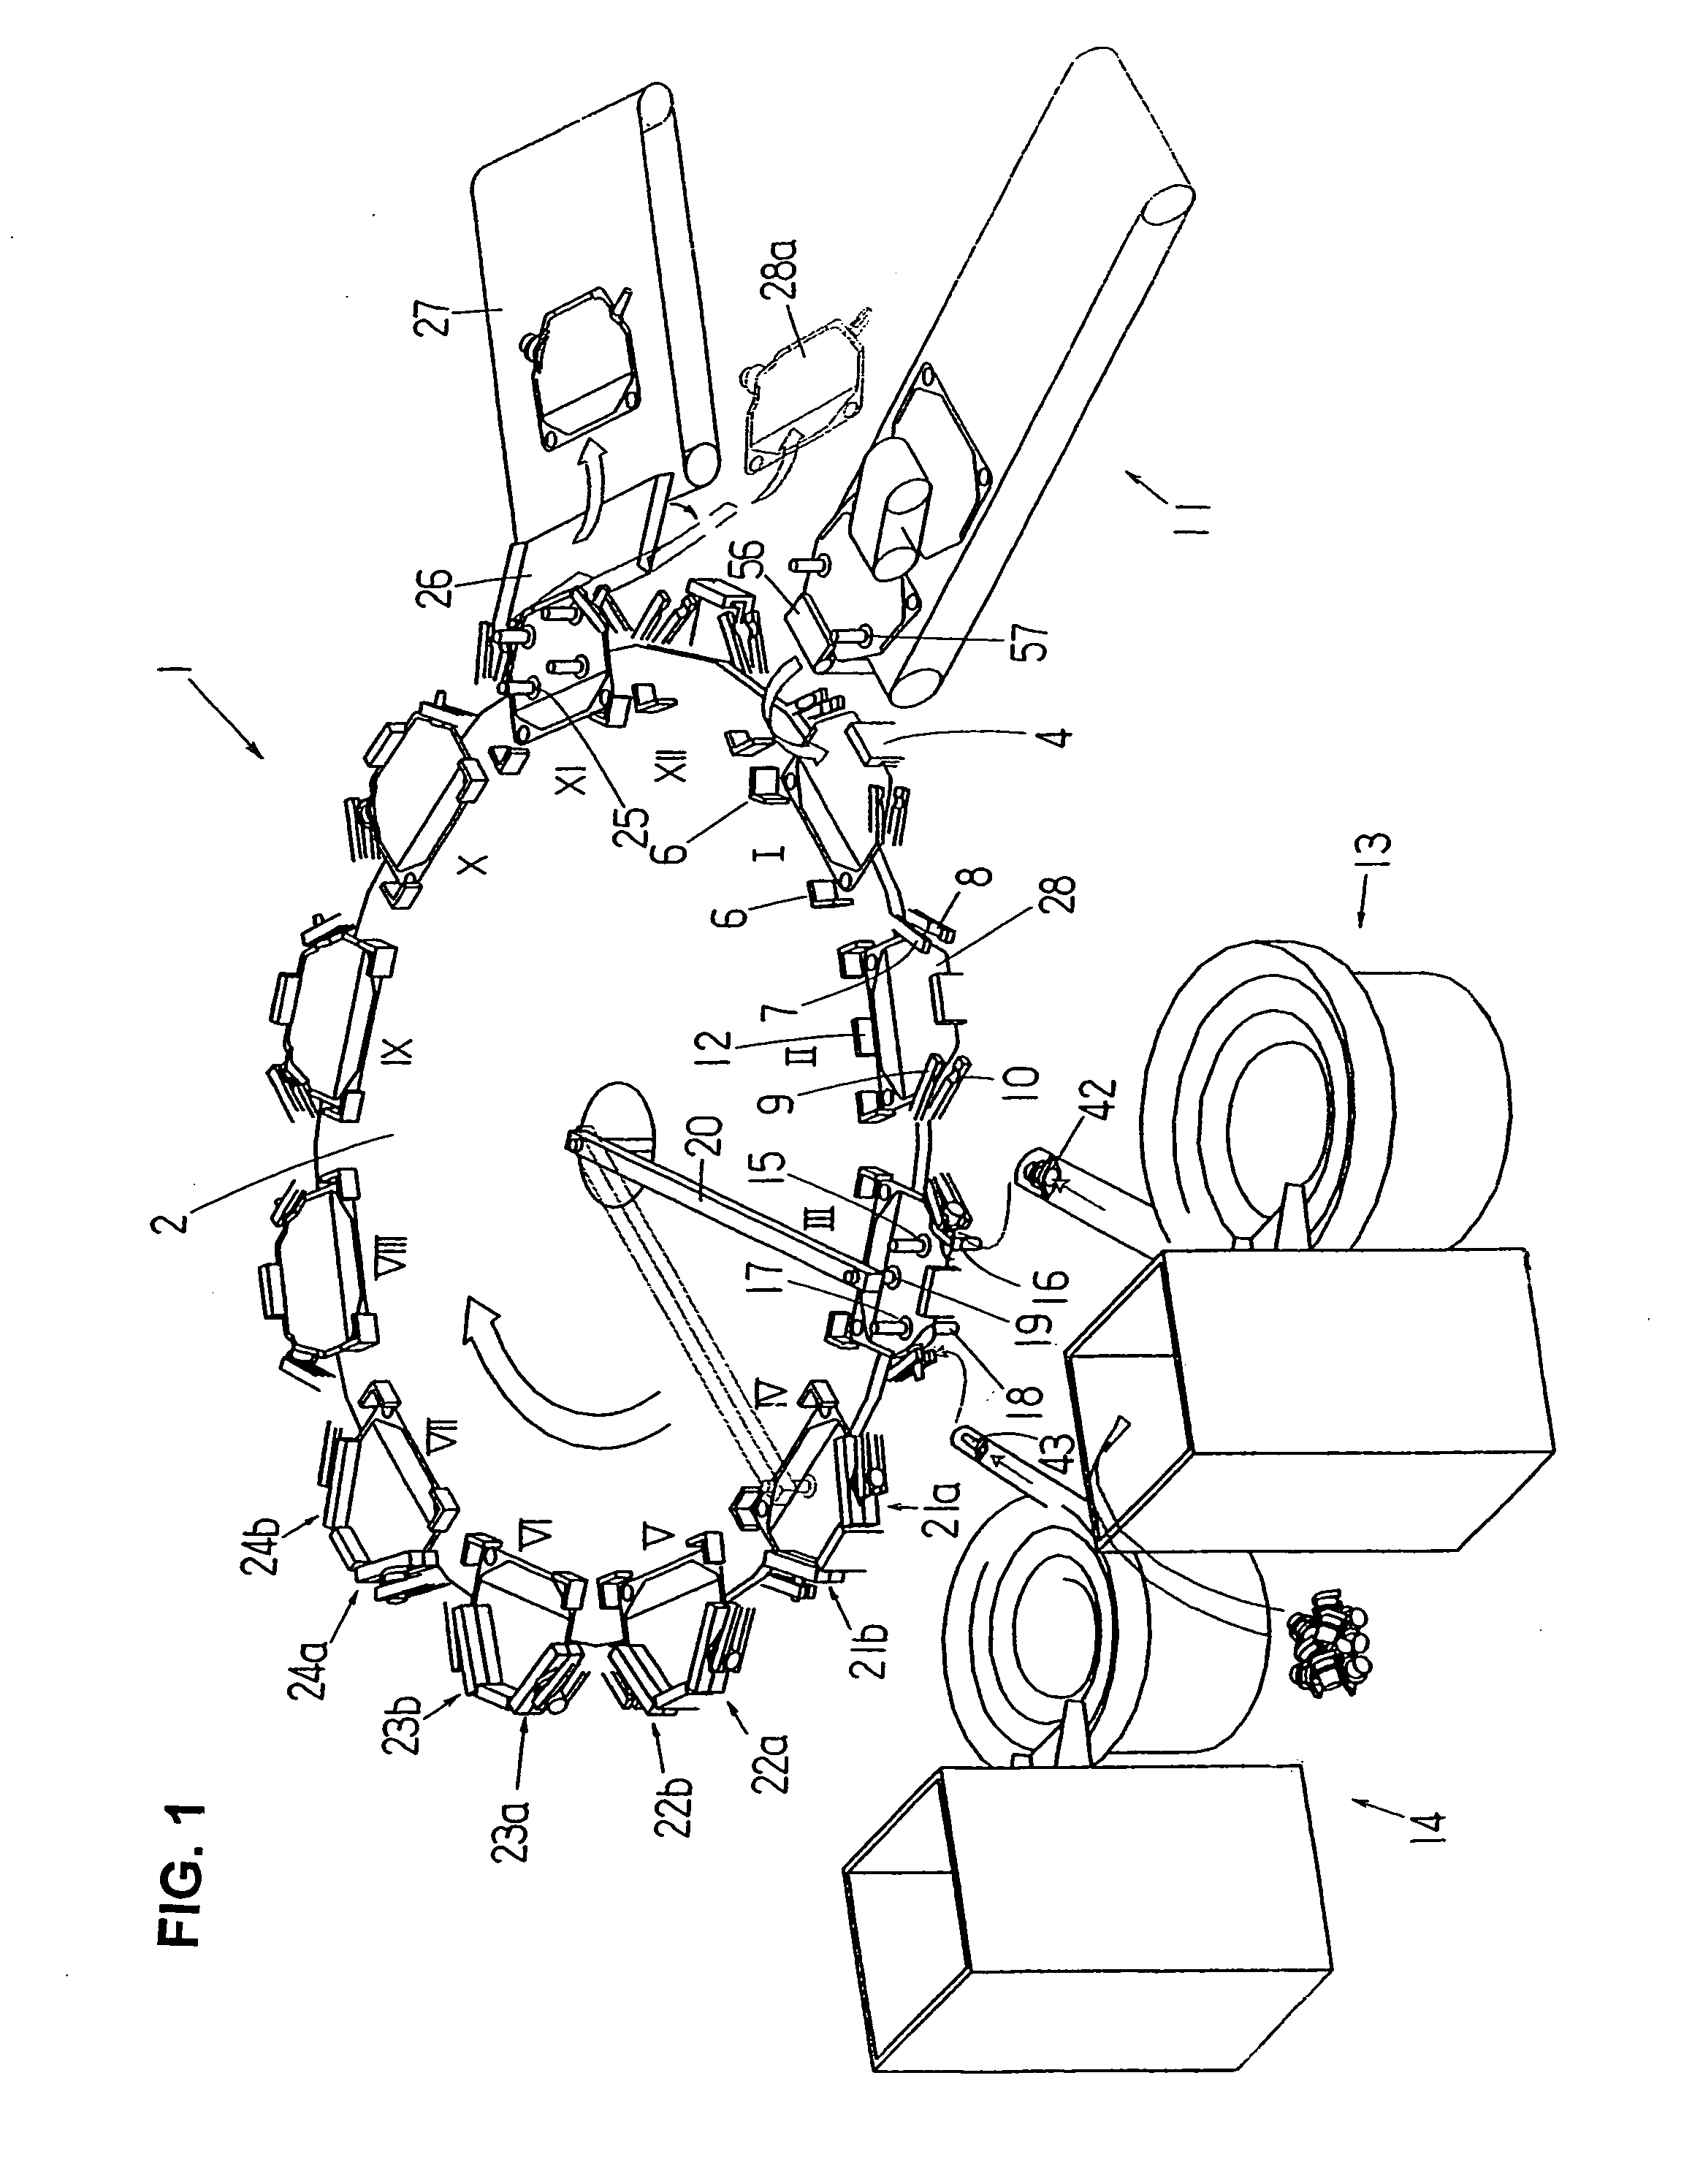 Method and apparatus for manufacturing a bag equipped with spouts